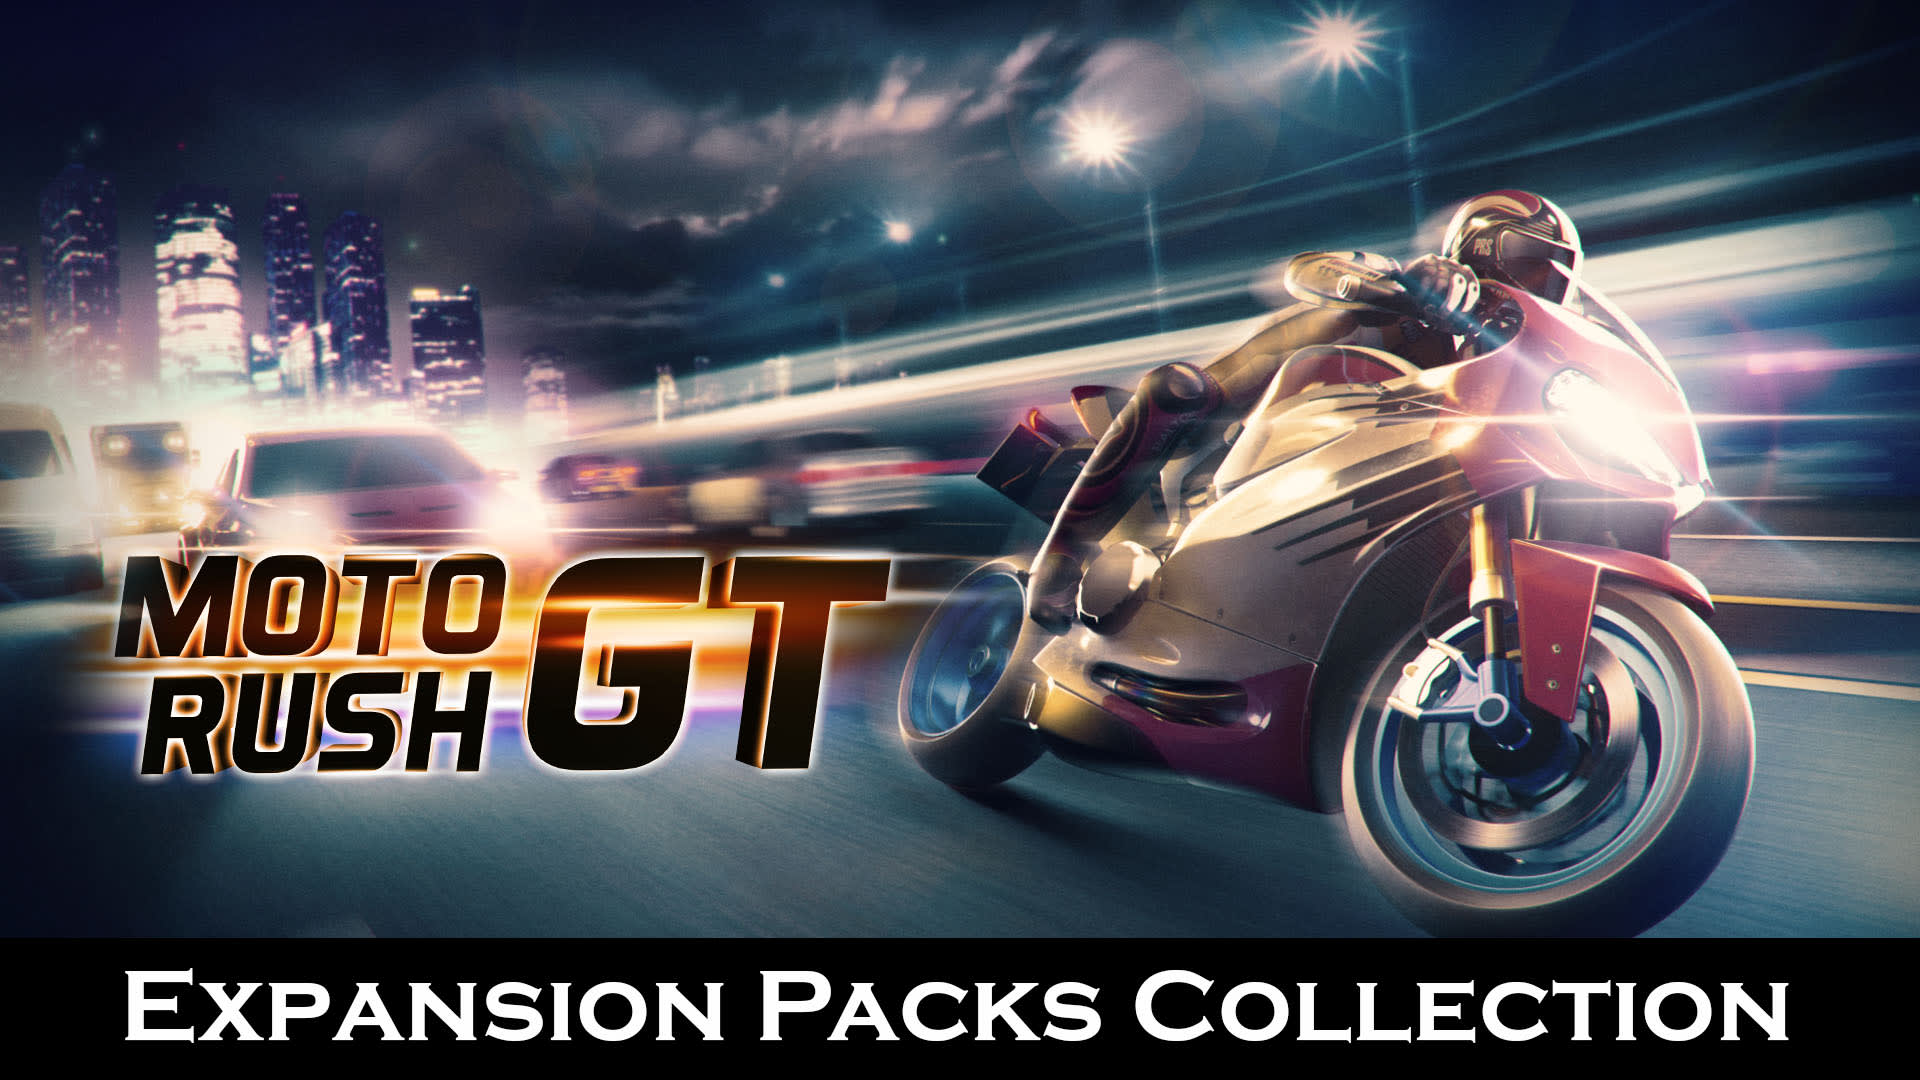 Moto Rush GT: Expansion Packs Collection